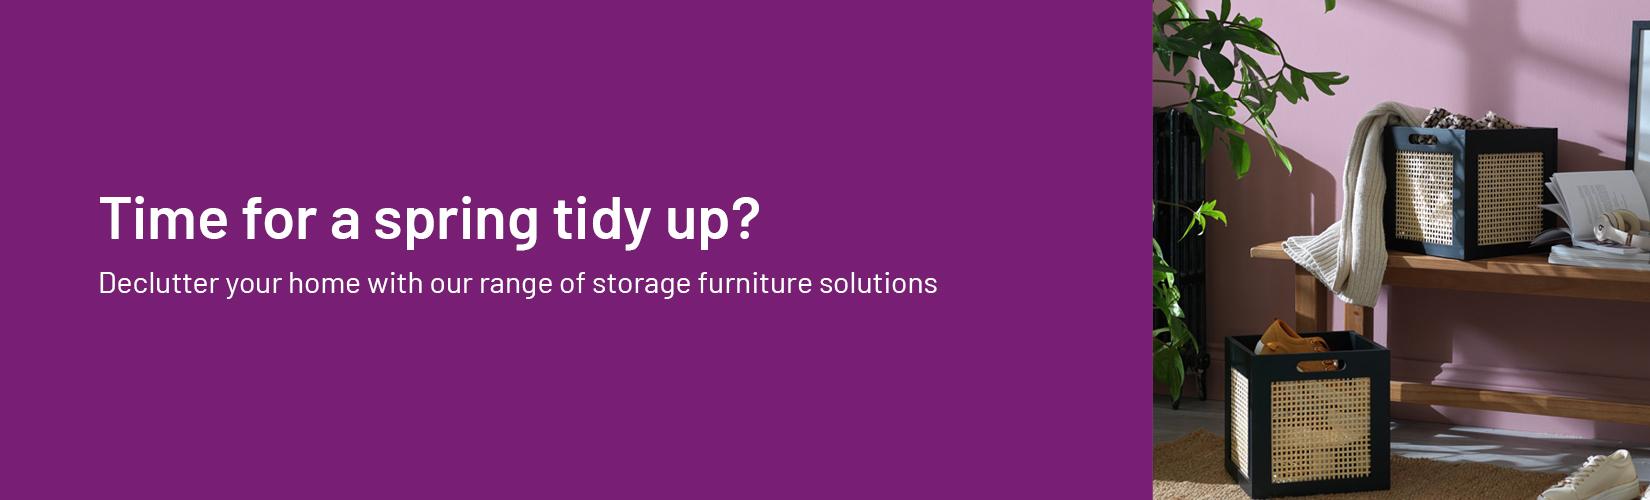 Time for a spring tidy up? Declutter your home with our range of storage furniture solutions.